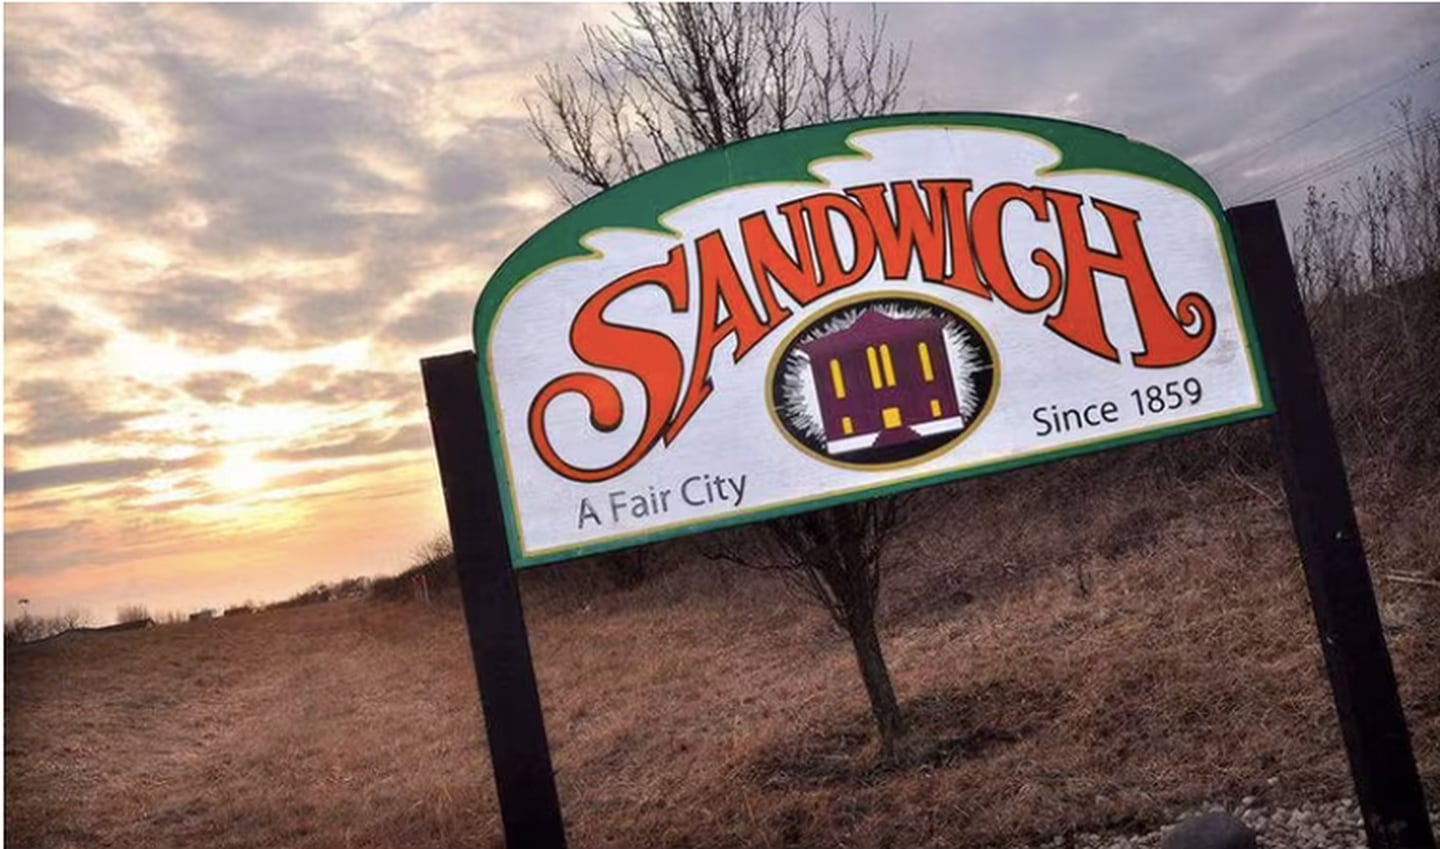 The Sandwich City Council is looking into whether to designate certain roads within the city as truck routes to reduce damage to streets not made to withstand truck traffic as well as to keep trucks out of residential neighborhoods.